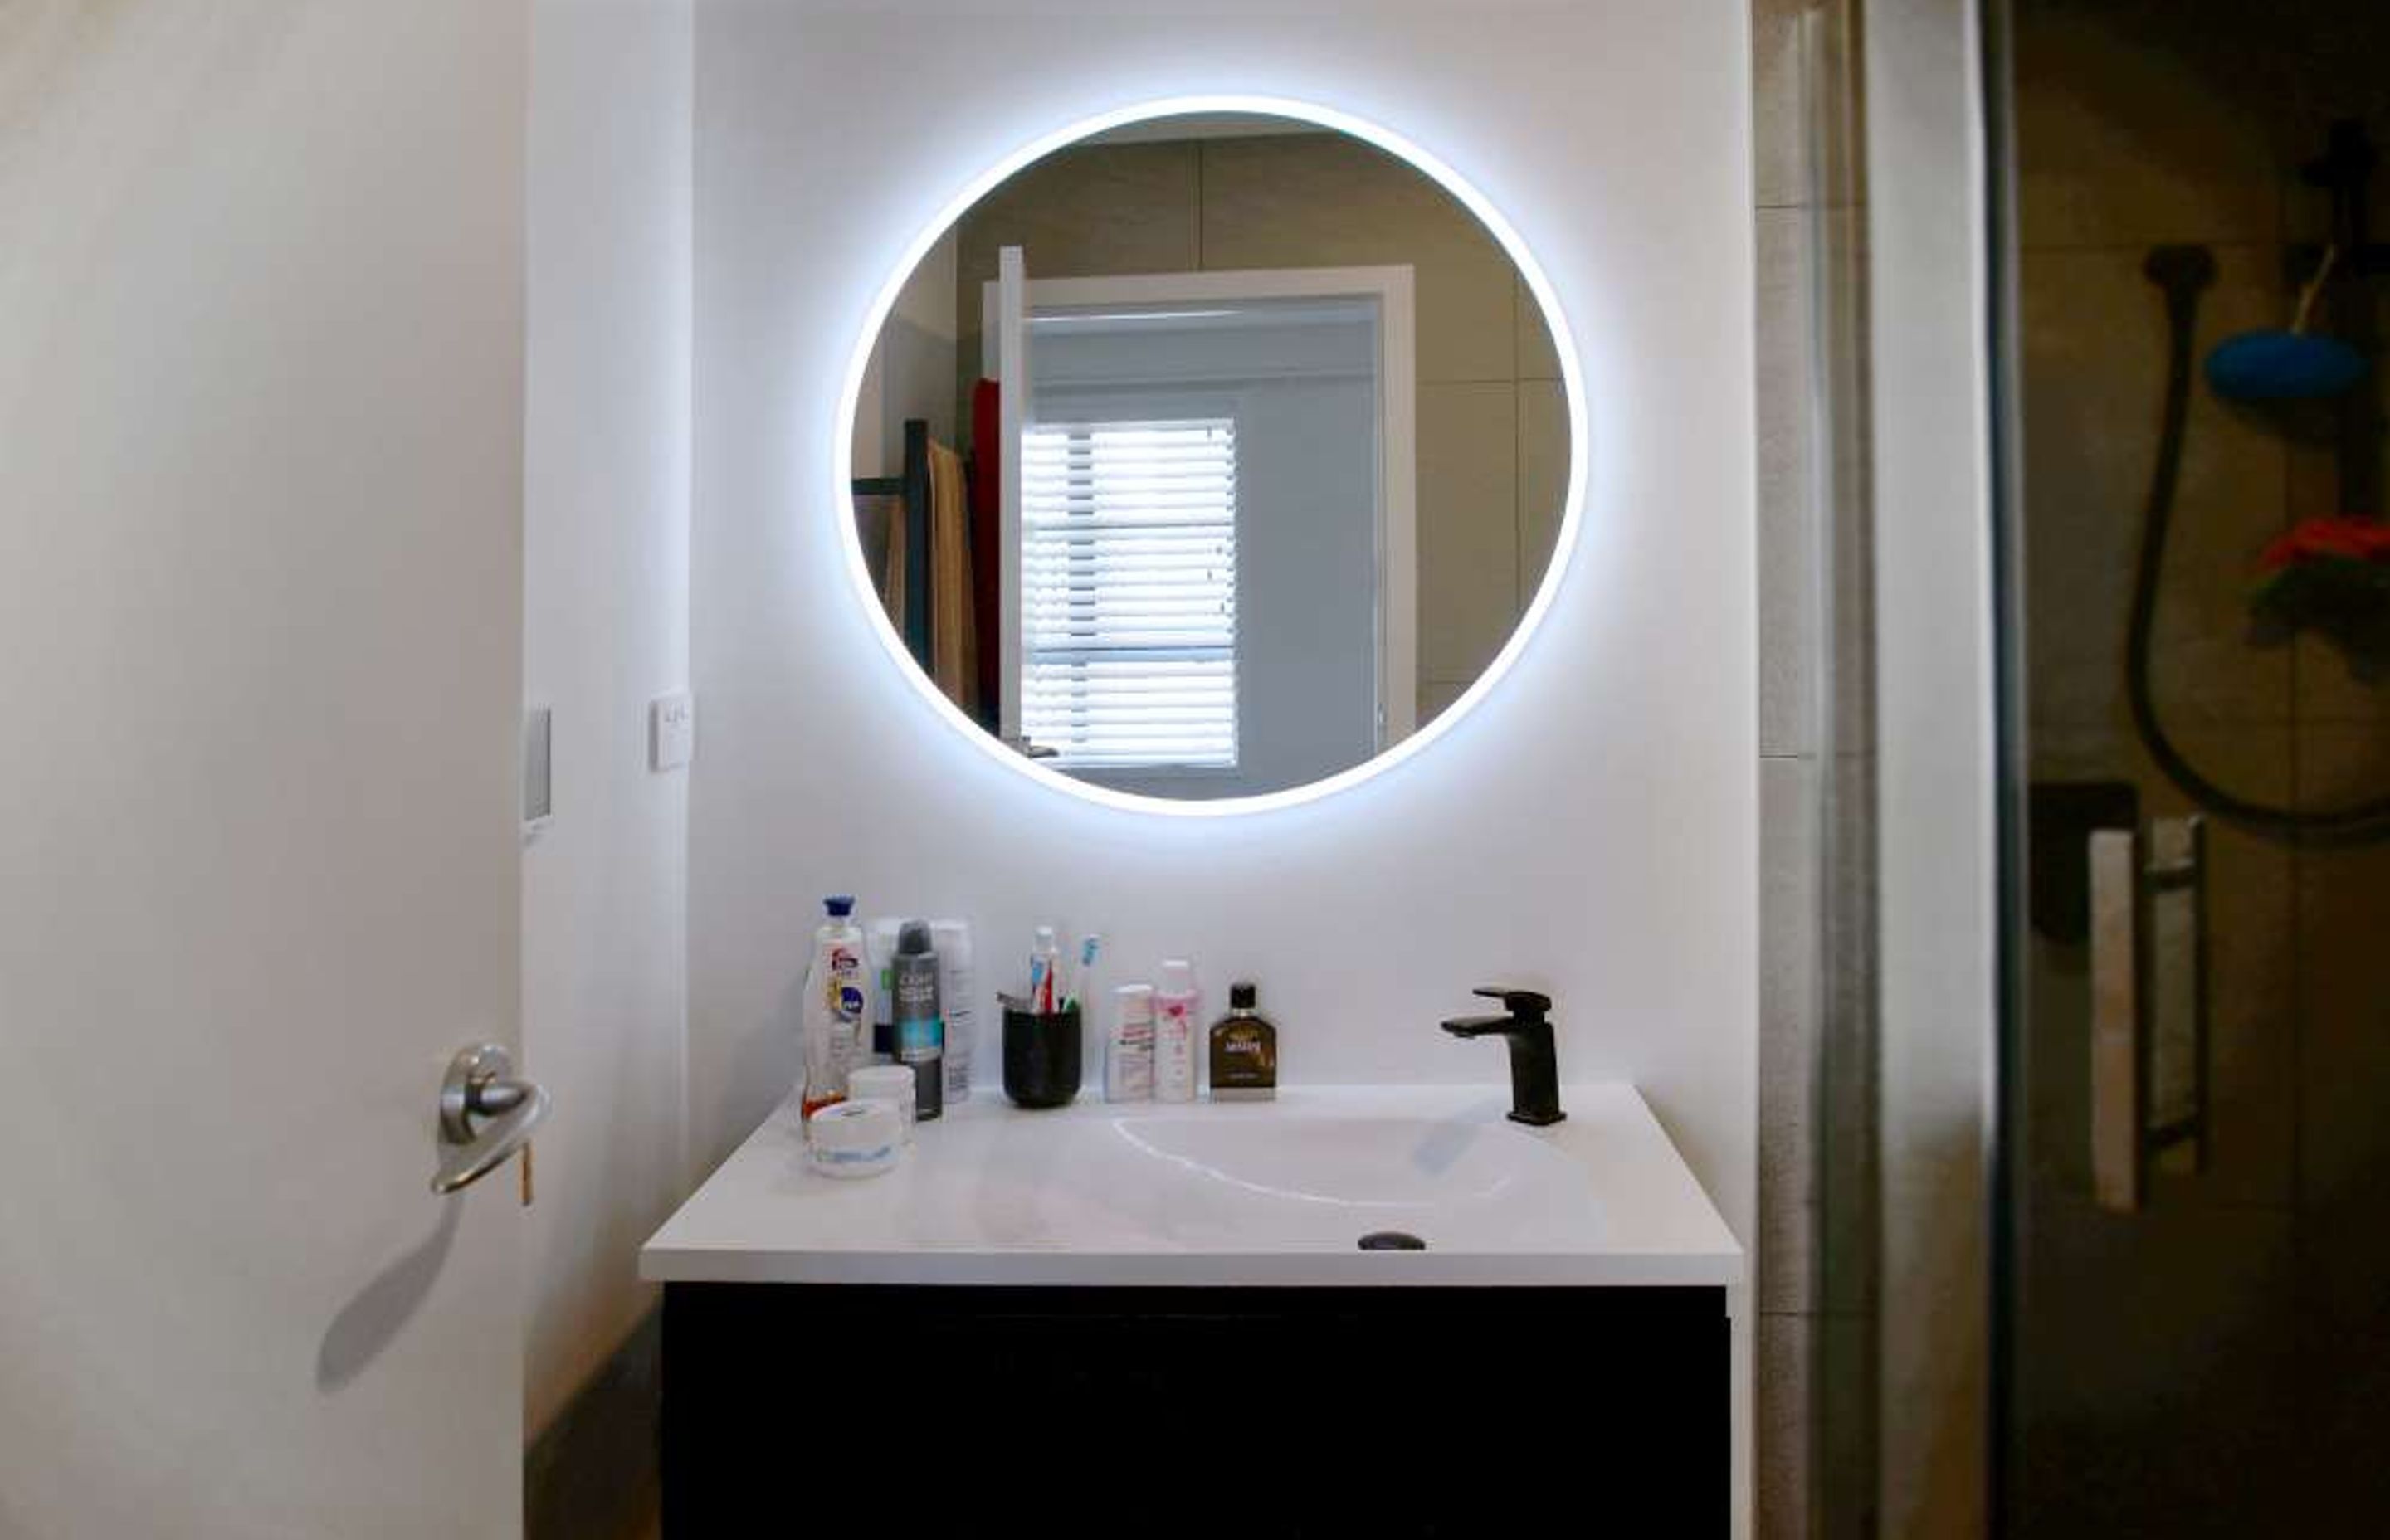 This bathroom renovation in Parnell was renovated to make it look luxurious and modern which was in line with our client’s urban lifestyle. The mirror installed had an LED anti-fog mirror with a touch button on it. The black floating shelves with sleek li